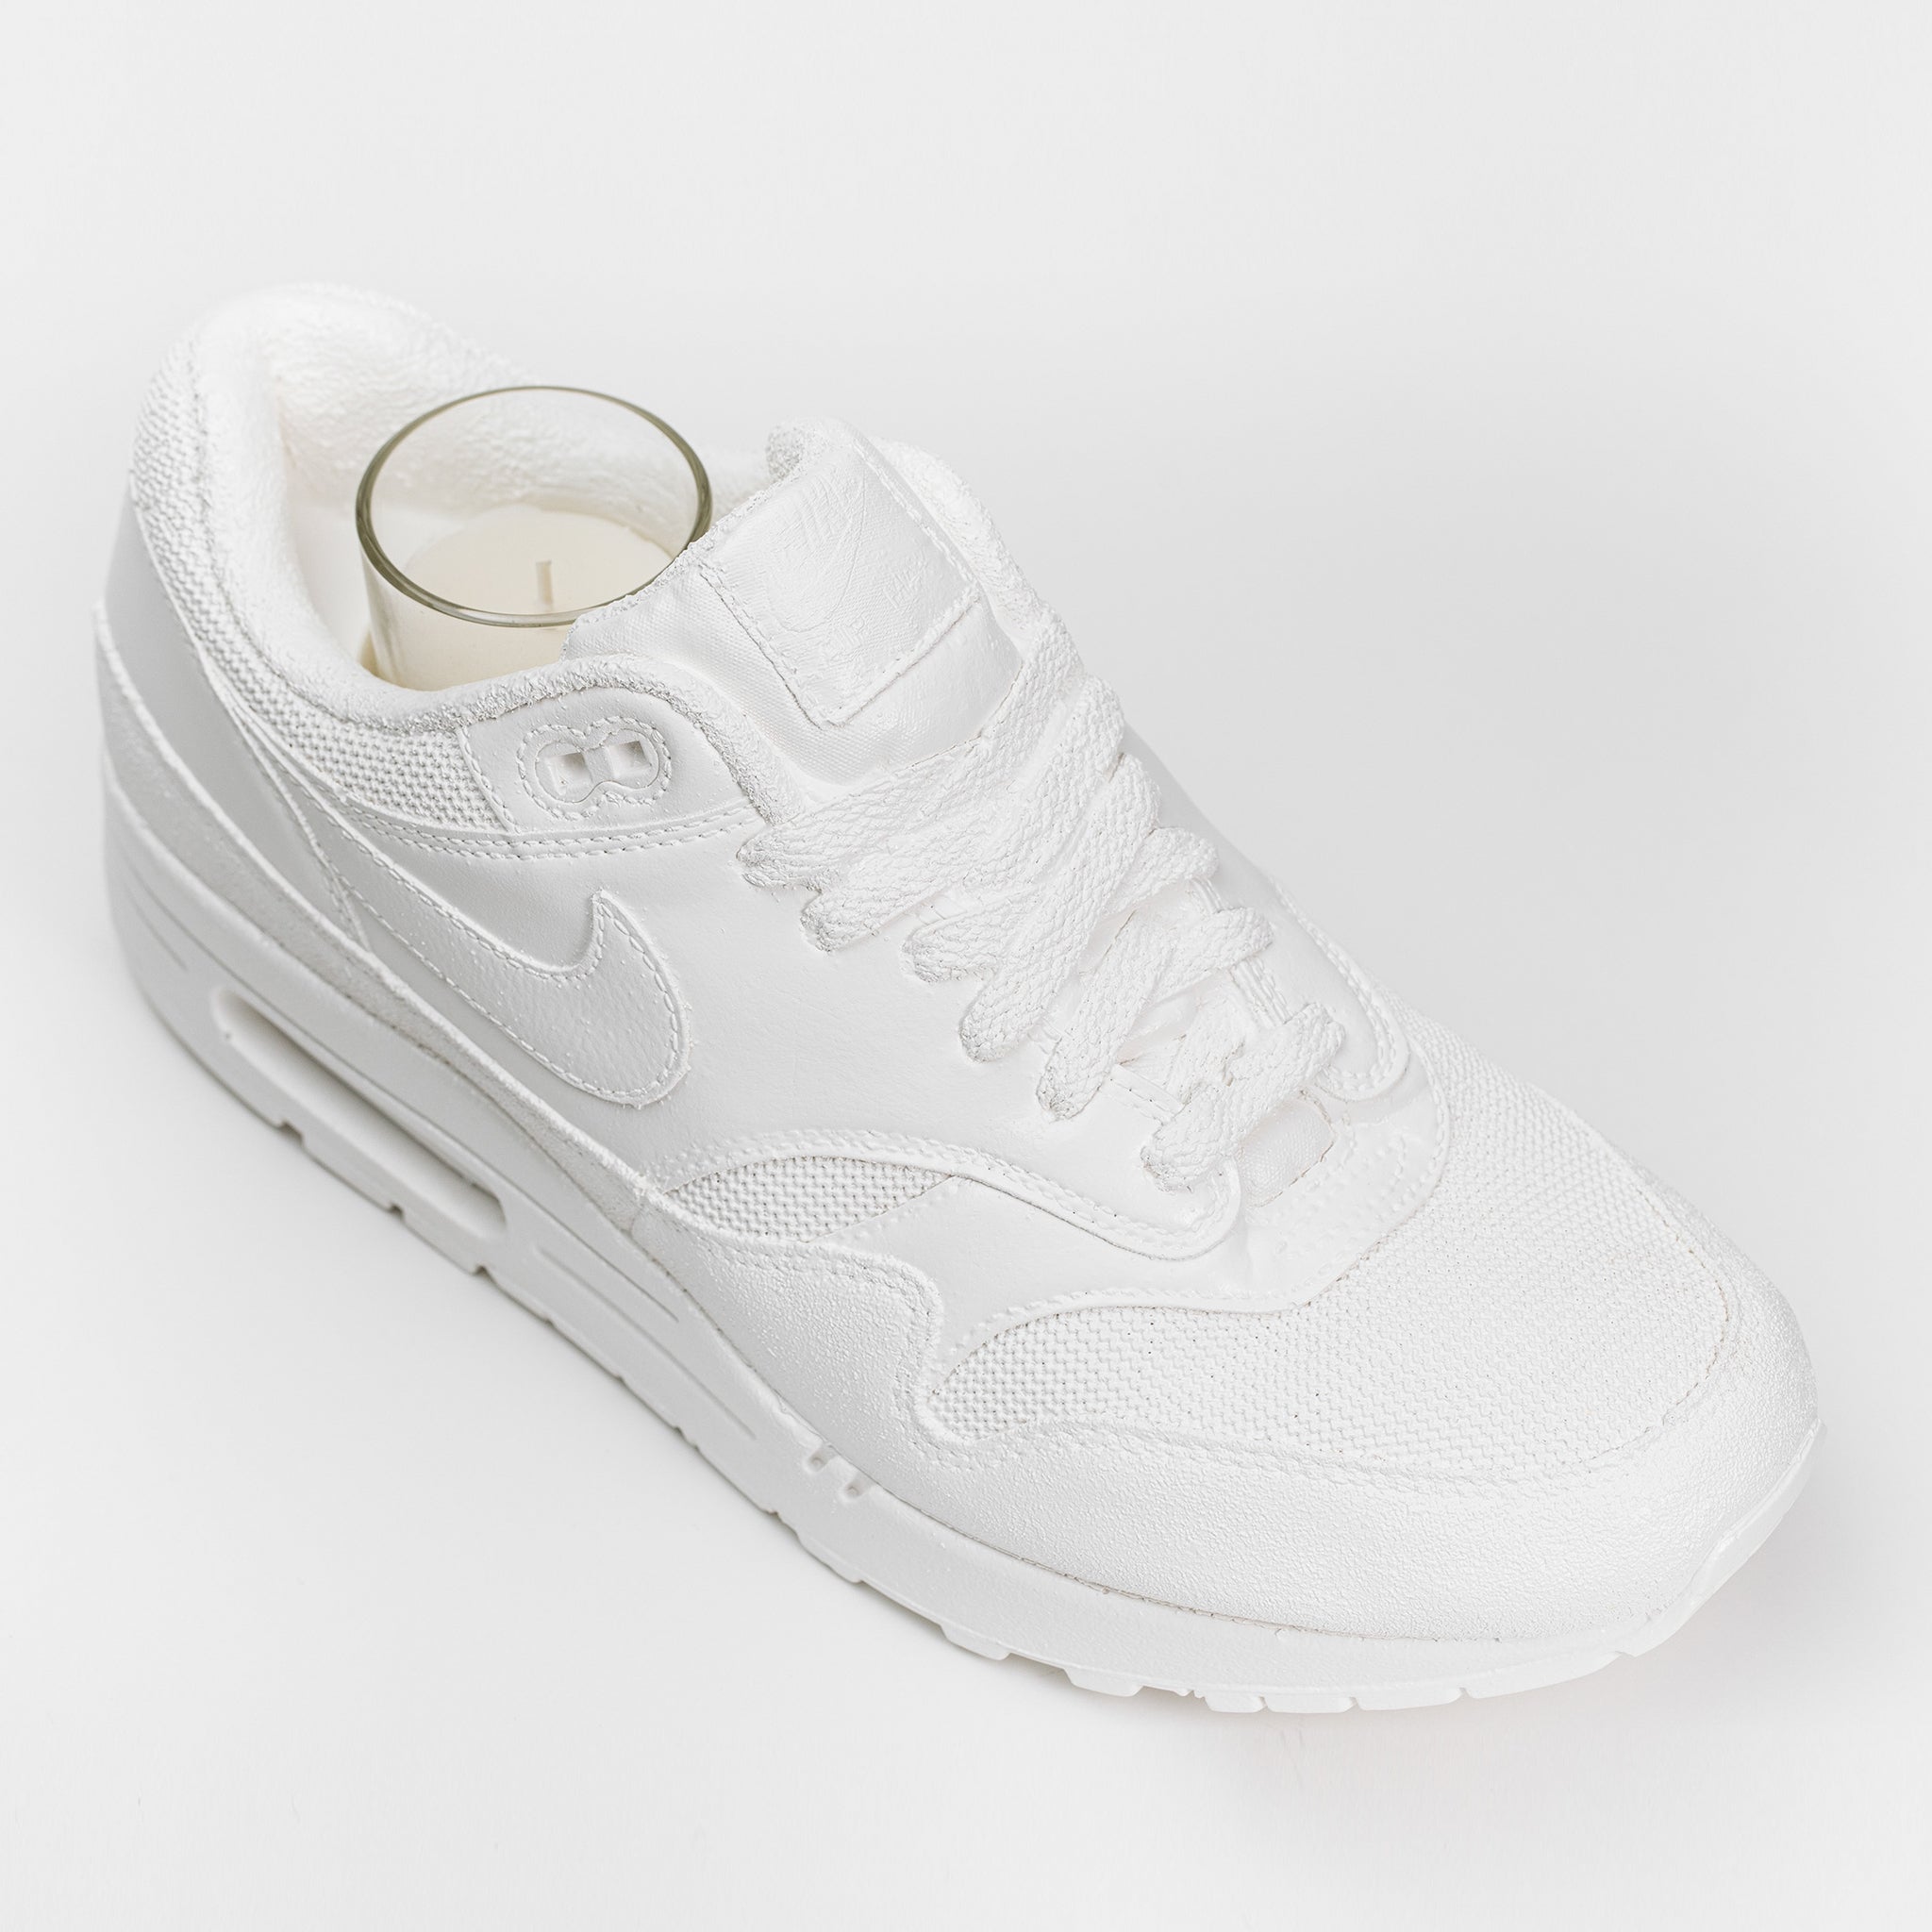 Gypsum stone casted nike air max sneaker candle holder with a votive candle